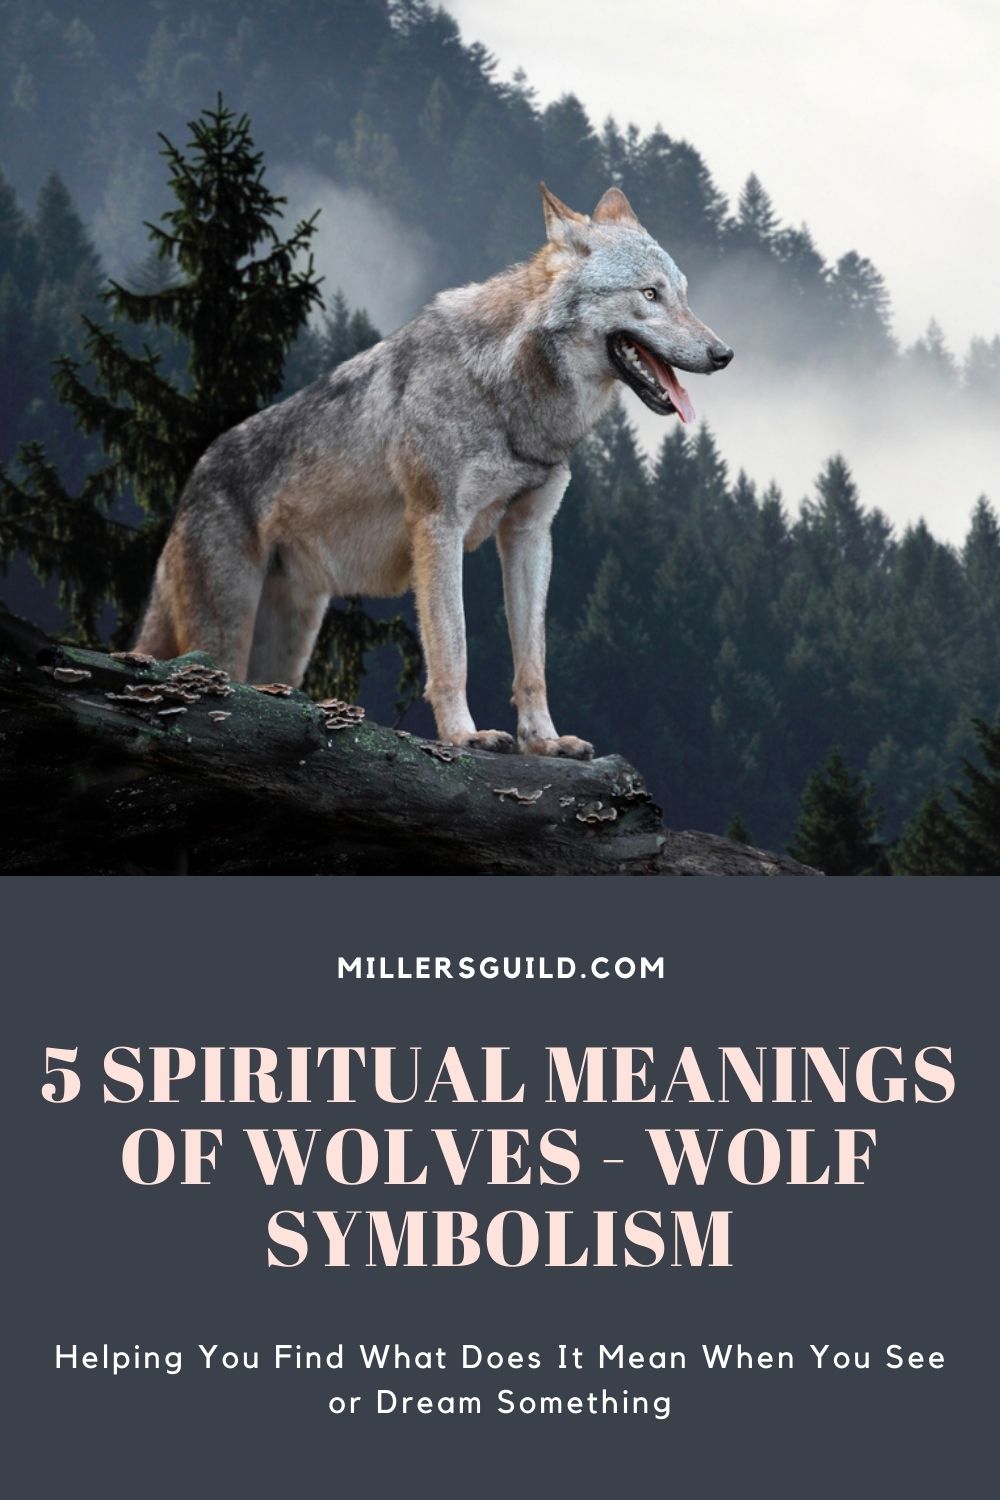 5 Spiritual Meanings of Wolves - Wolf Symbolism 2